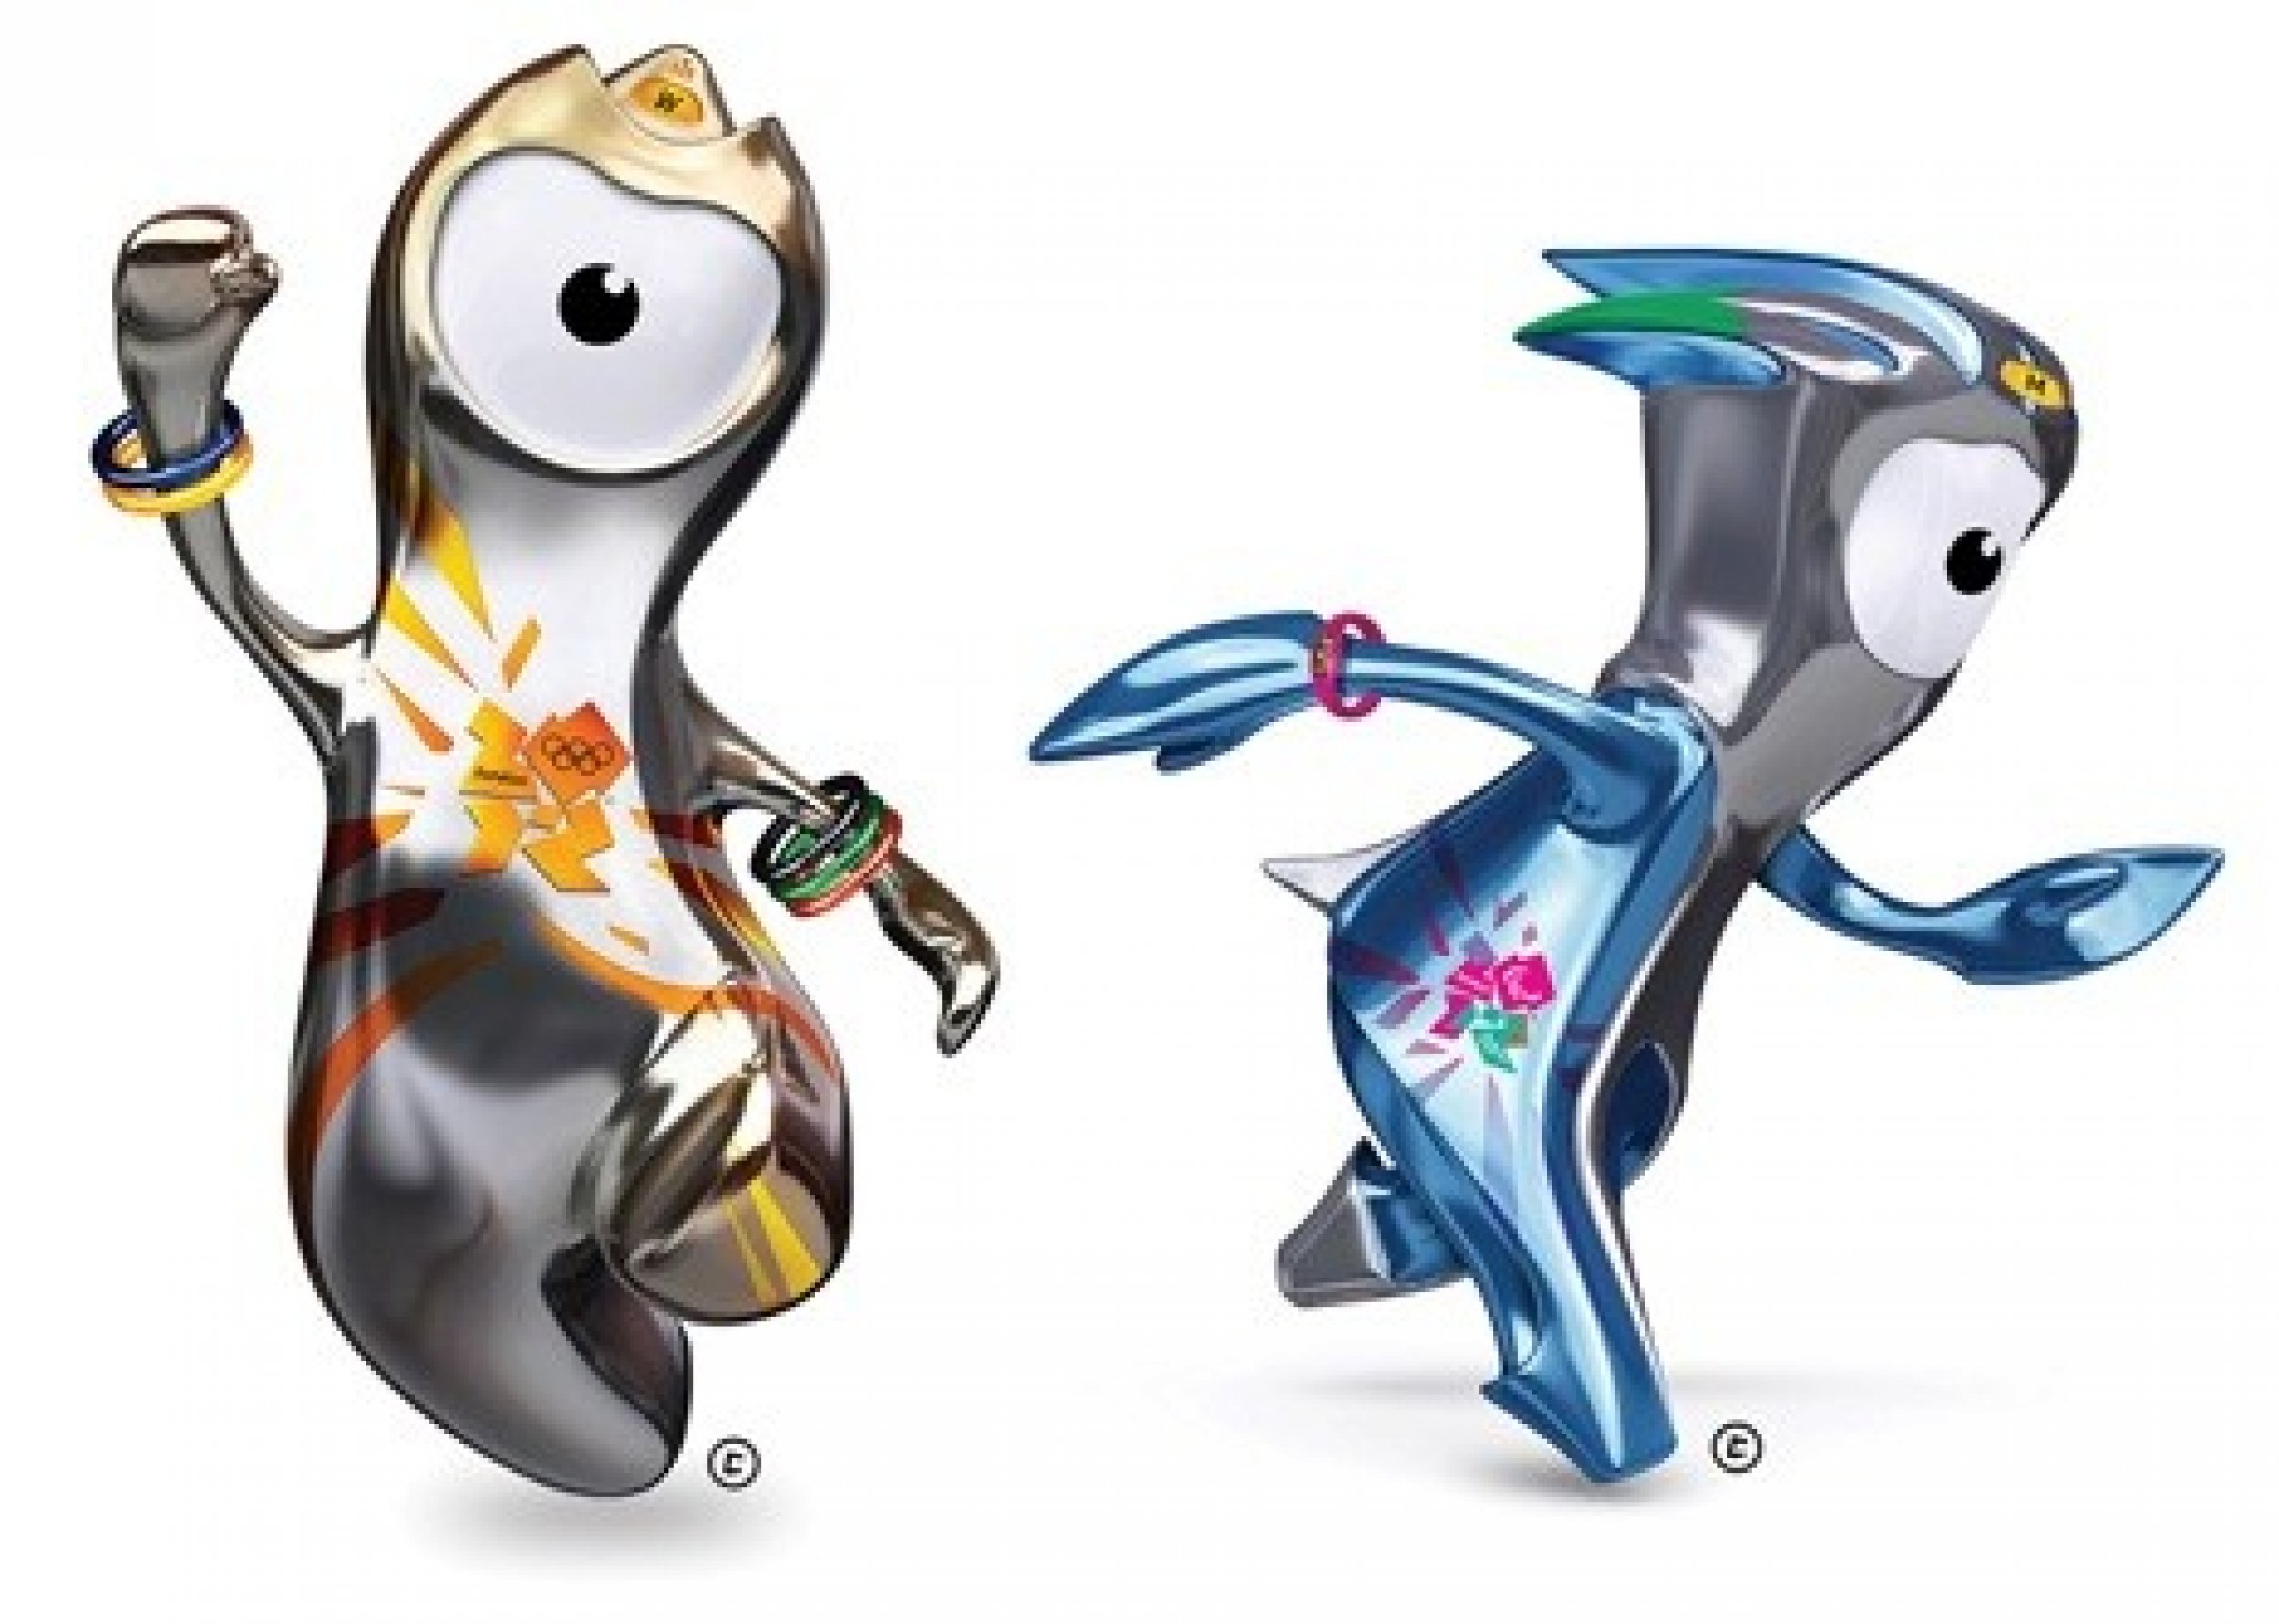 Wenlock And Mandeville All About The Mascots Of The 2012 London Olympics